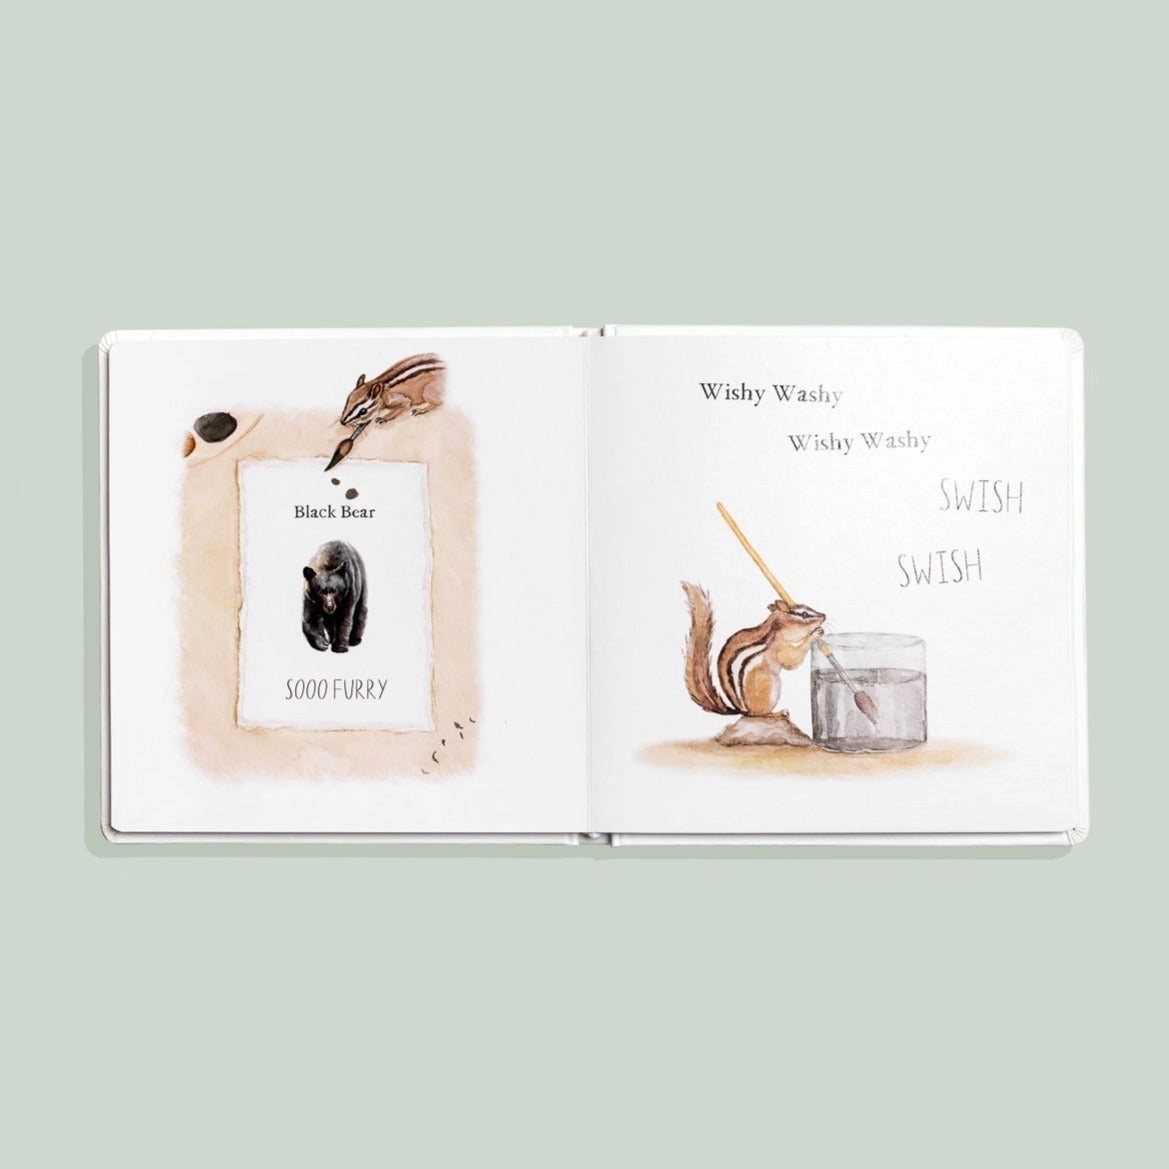 Page & Tate Co. | Wishy Washy, A First Words and Colors Book by Tabitha Paige